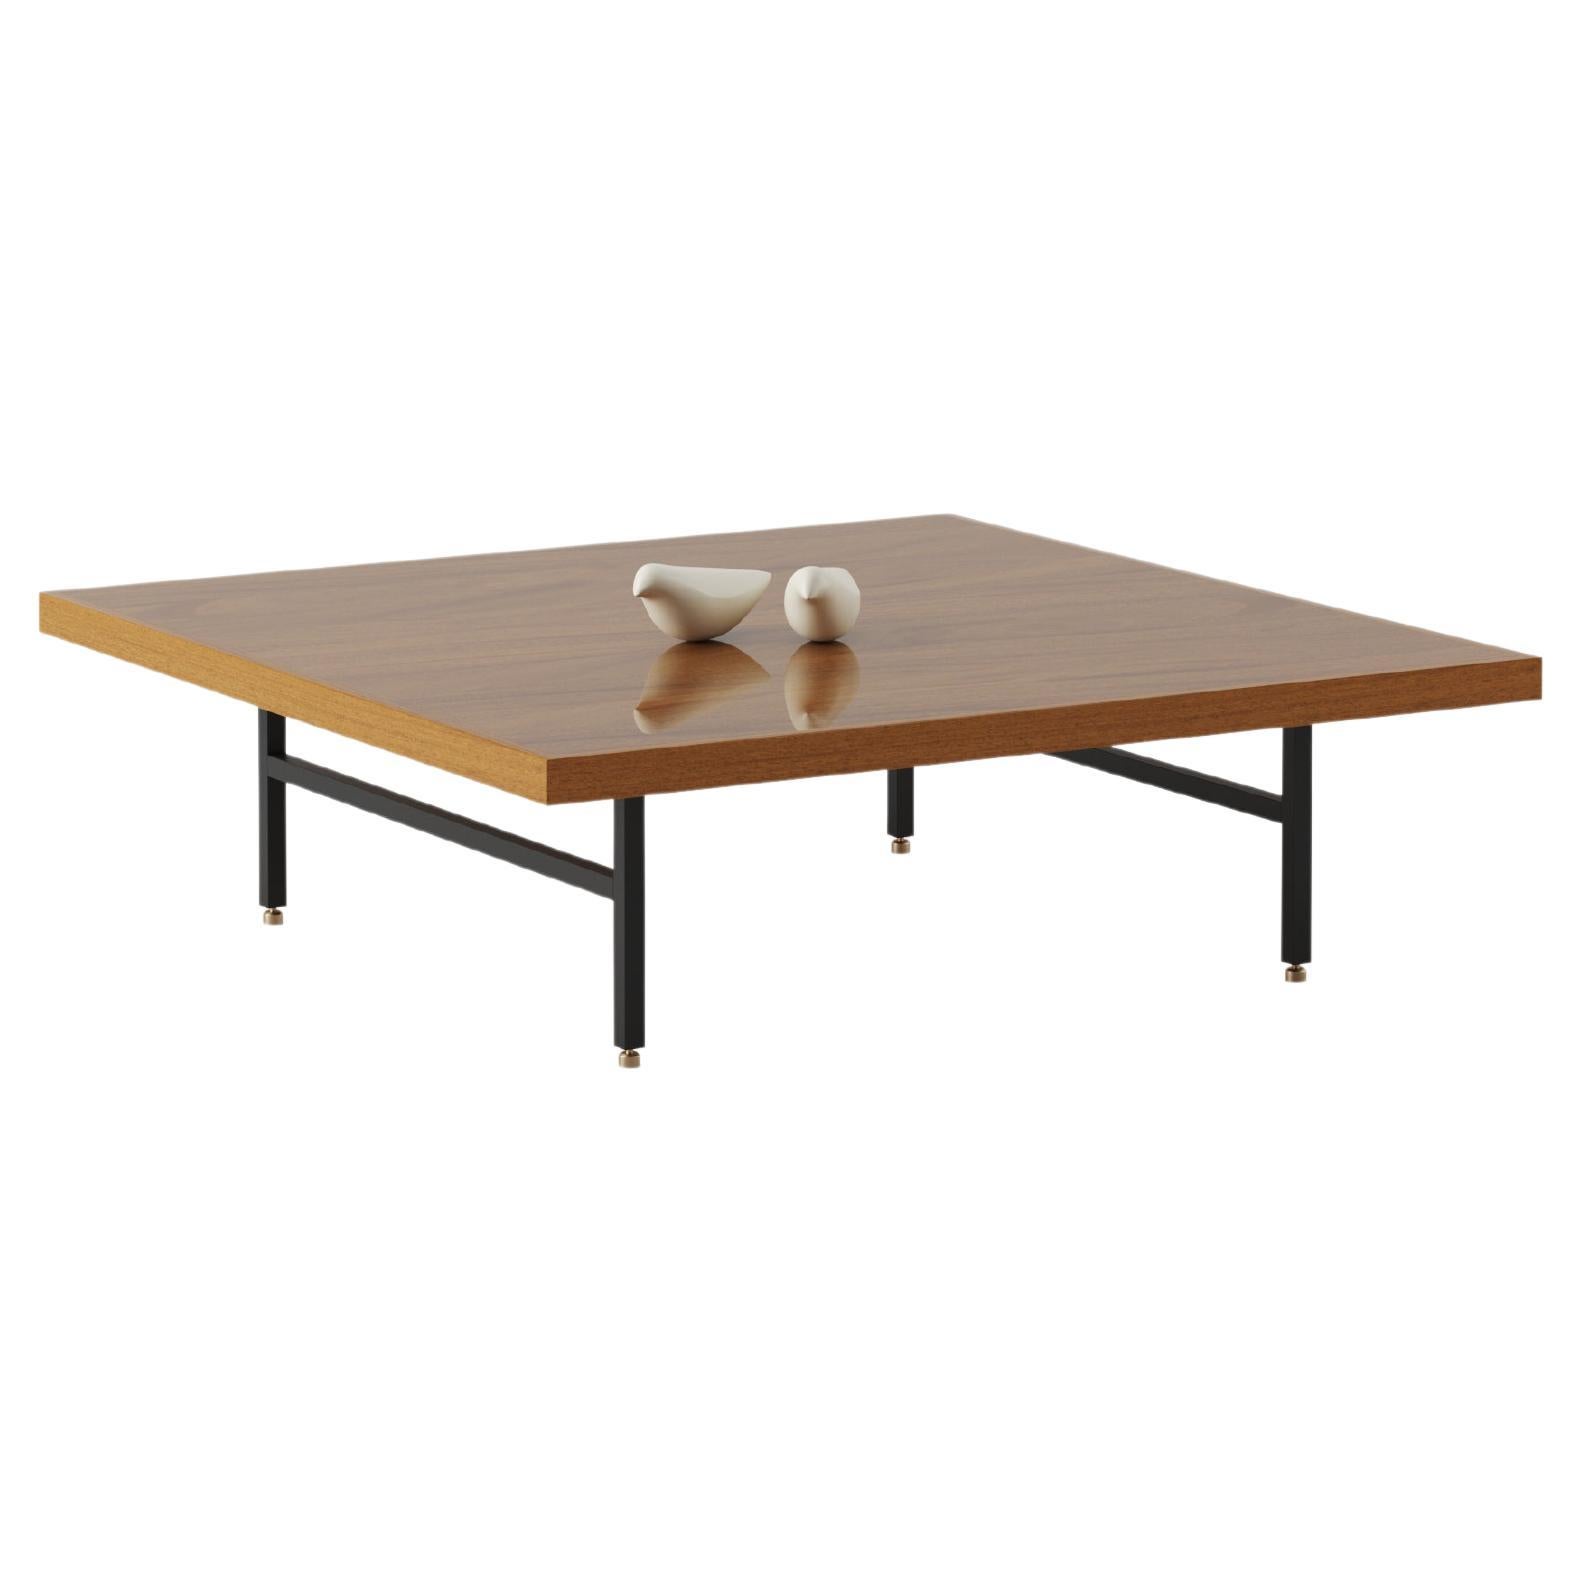 Trapeze Coffee Table by Master Studio, Lacquered Mahogany and Iroko Wood